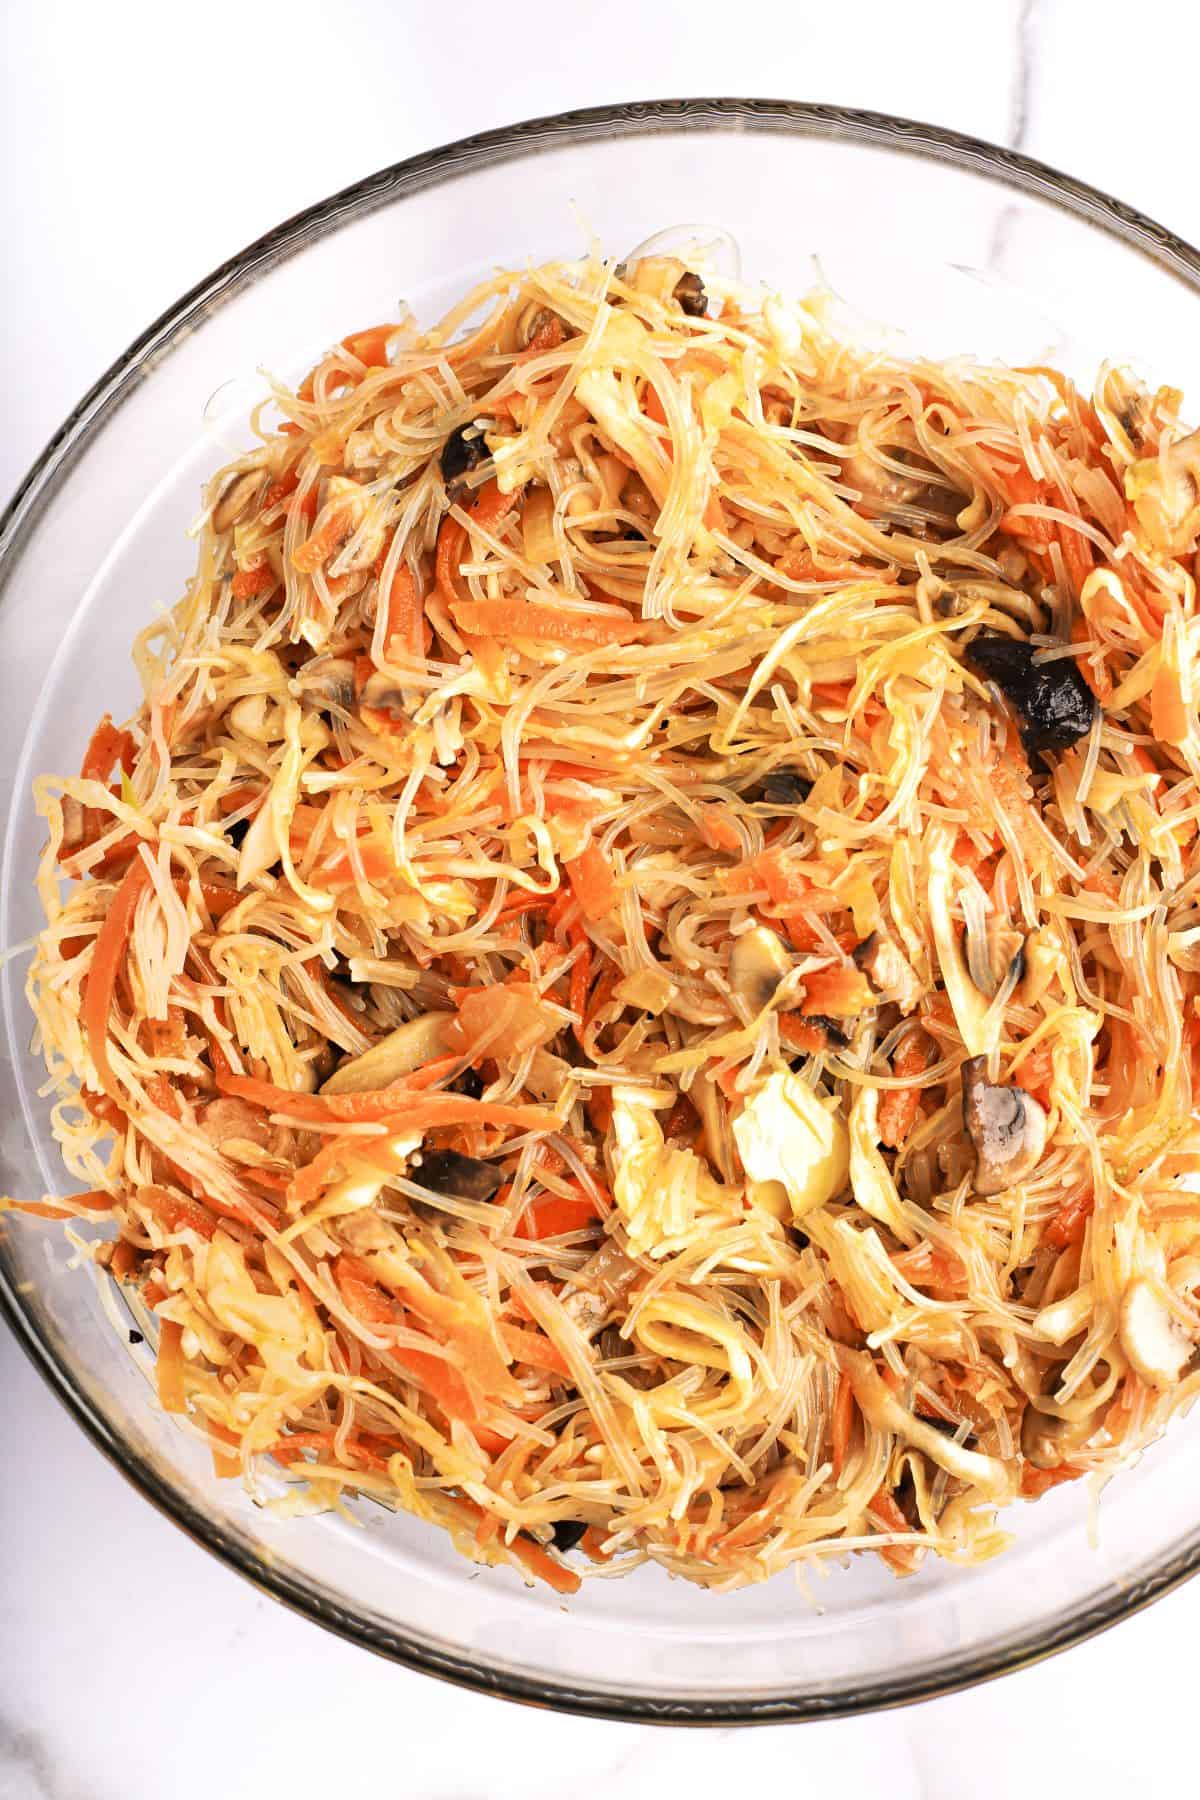 A bowl of spring roll filling, made with rice vermicelli, carrots, mushrooms, and more.